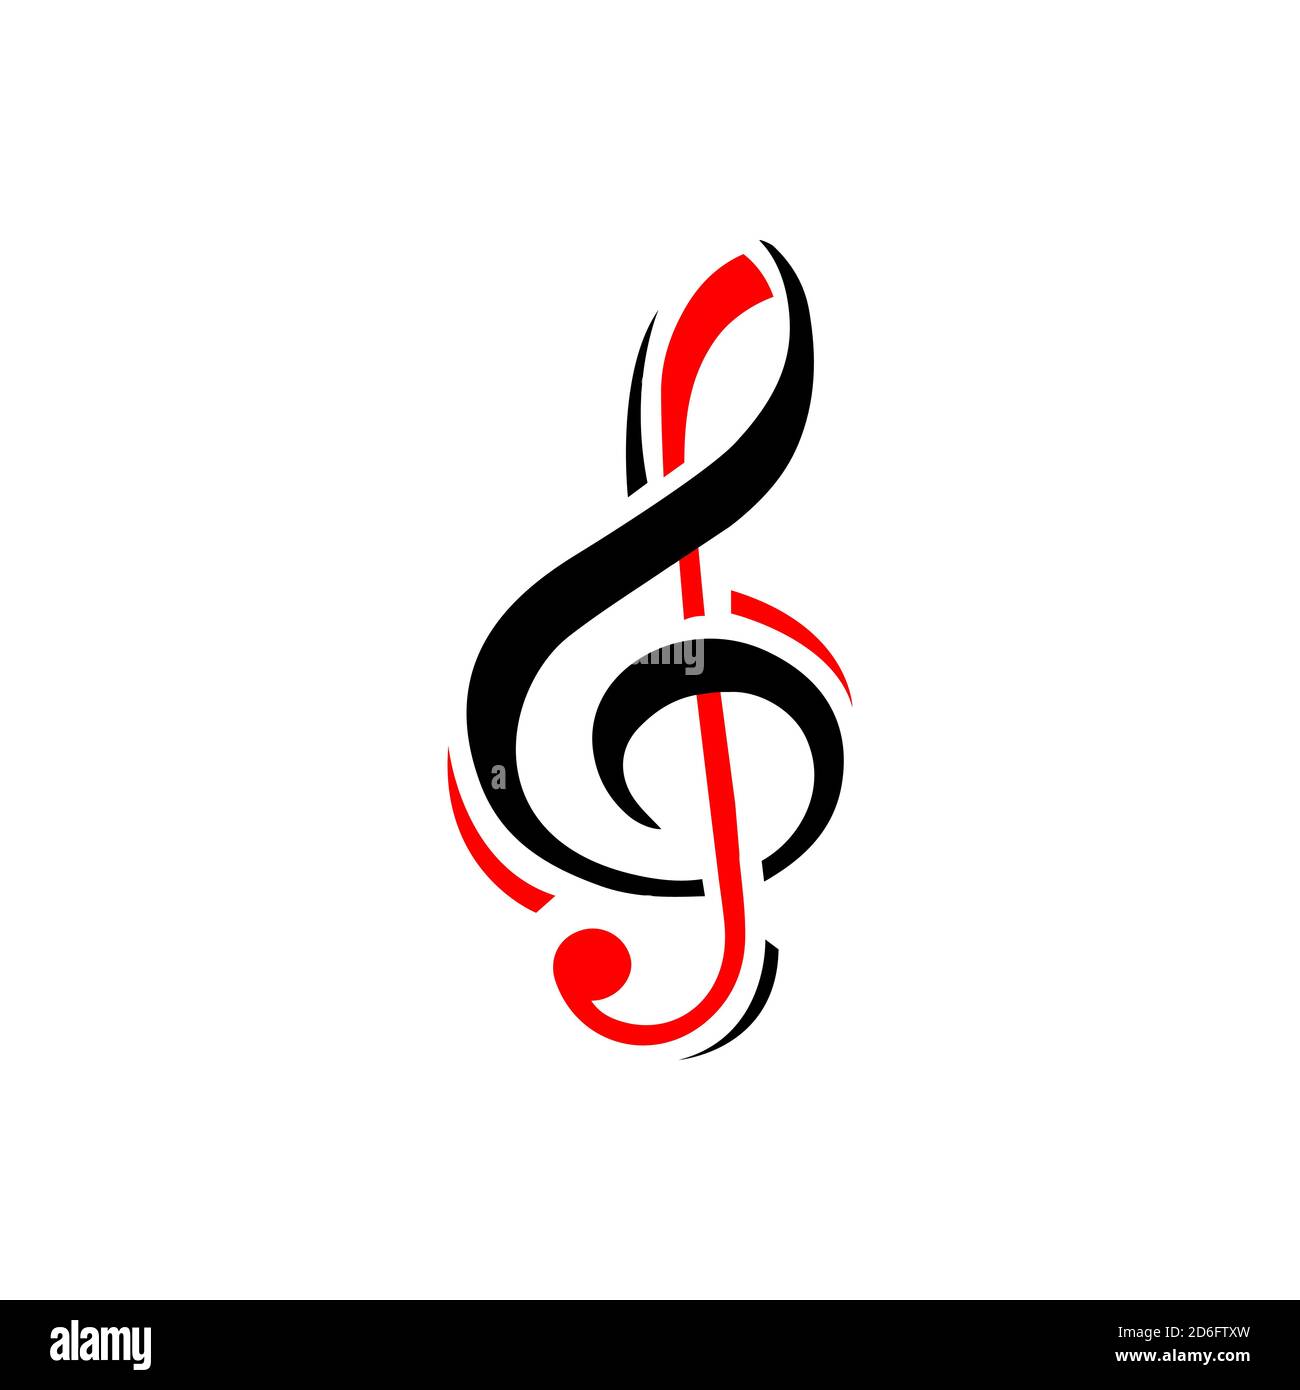 music notes logo creative abstract key note symbol instrumental template Stock Vector